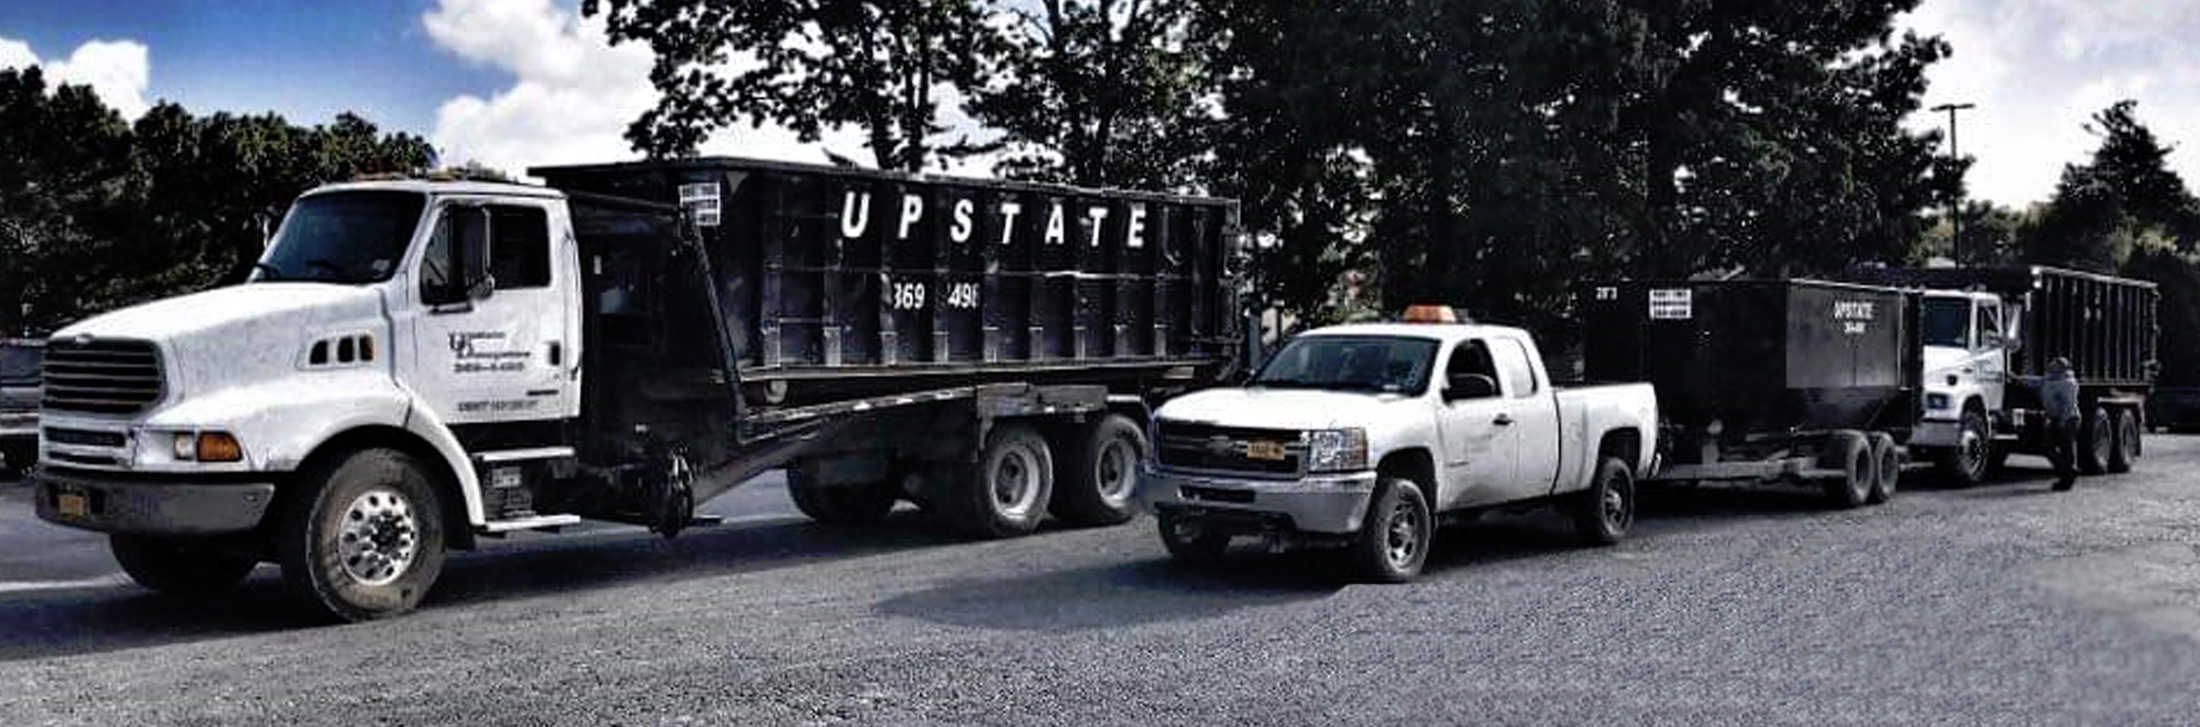 Upstate Dumpsters: You Toss It, We Haul It!